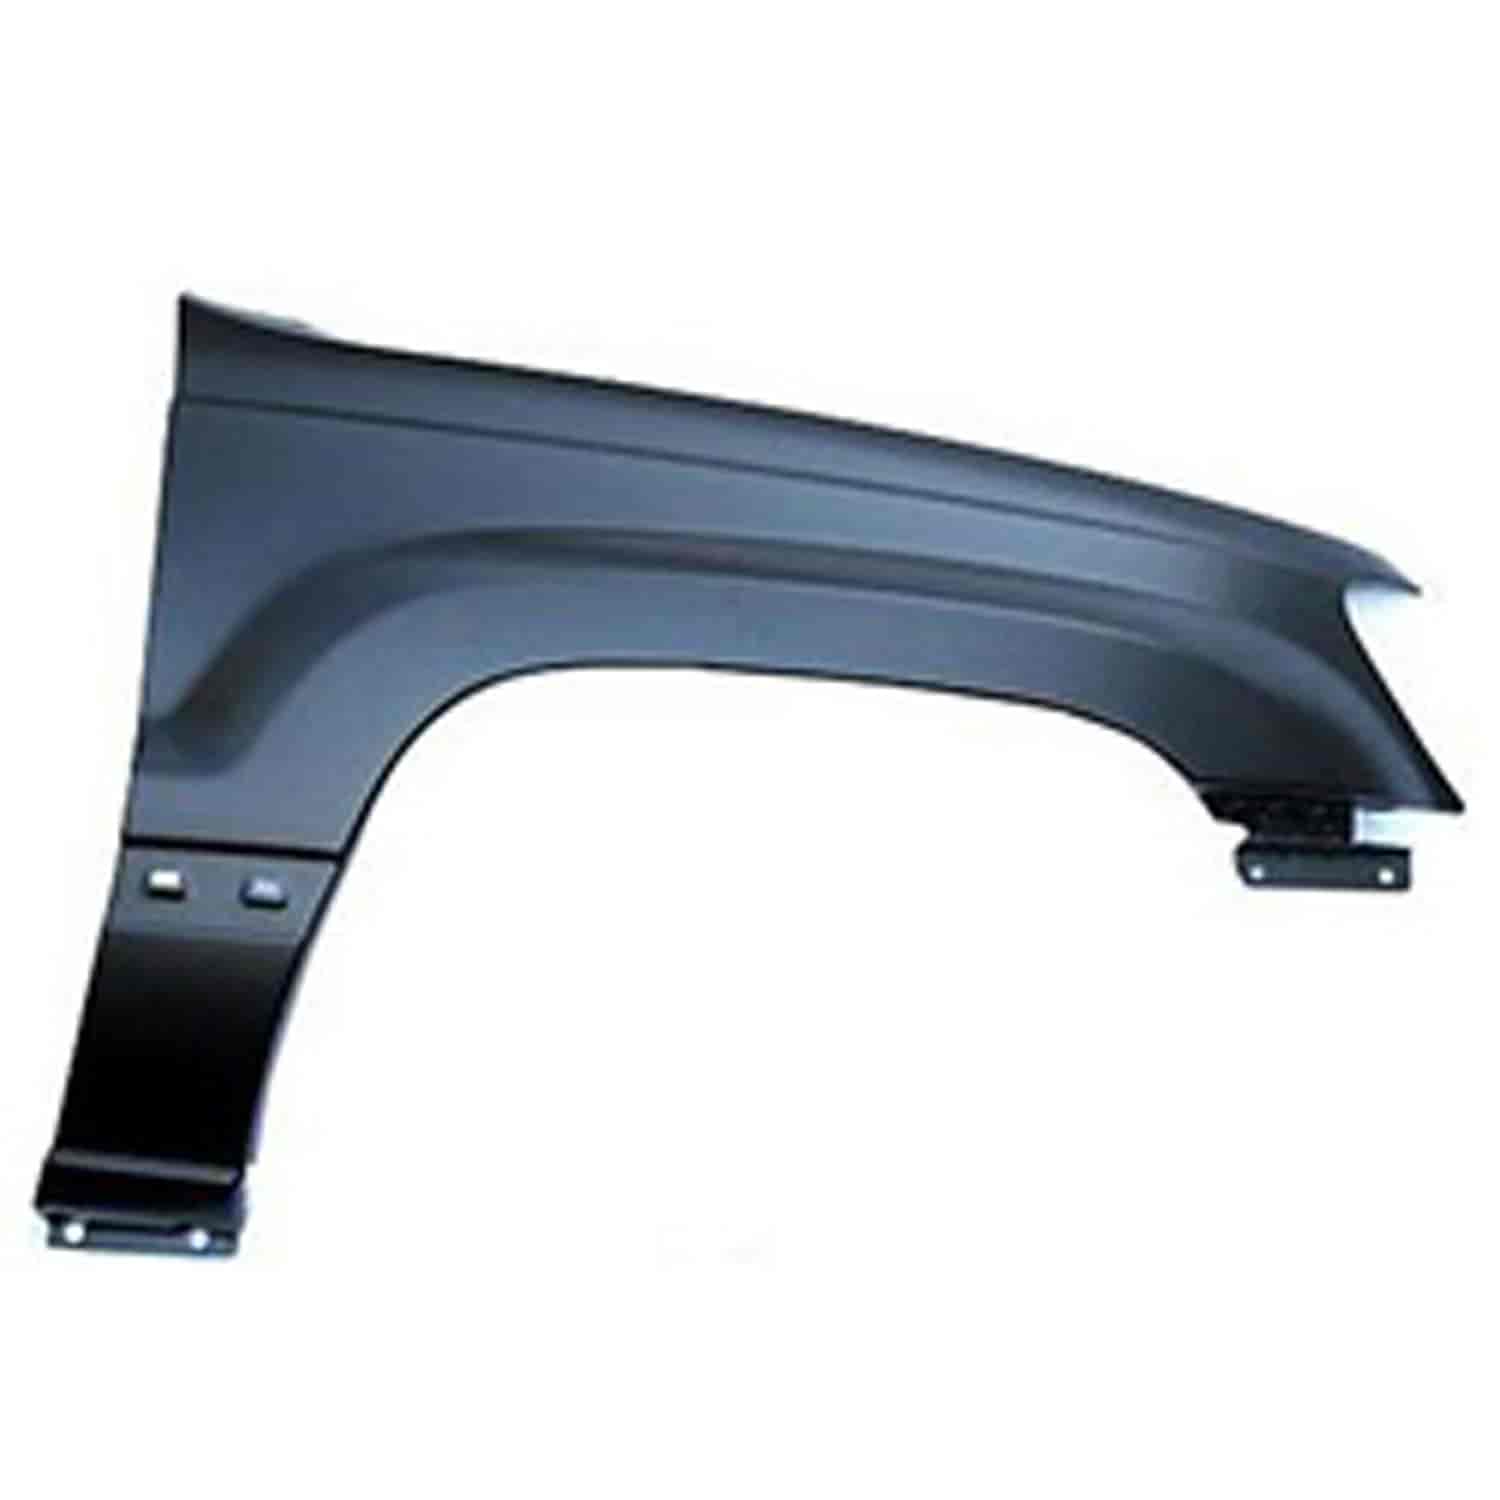 Replacement right front fender from Omix-ADA, Fits 99-04 Jeep Grand Cherokee WJ